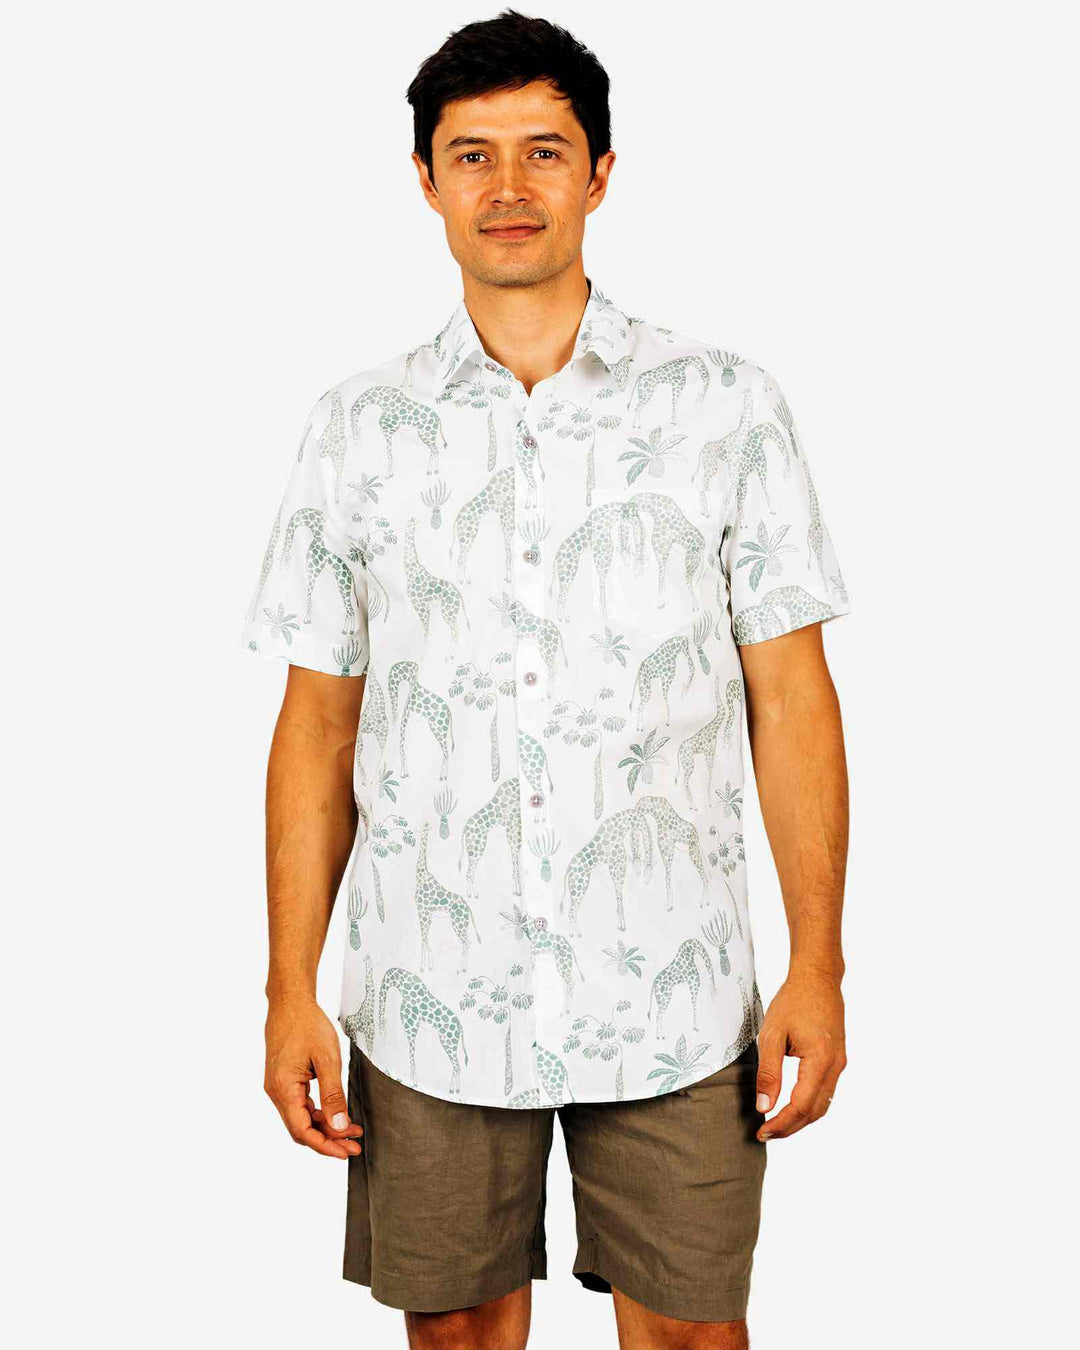 Mens white holiday shirt with green giraffes